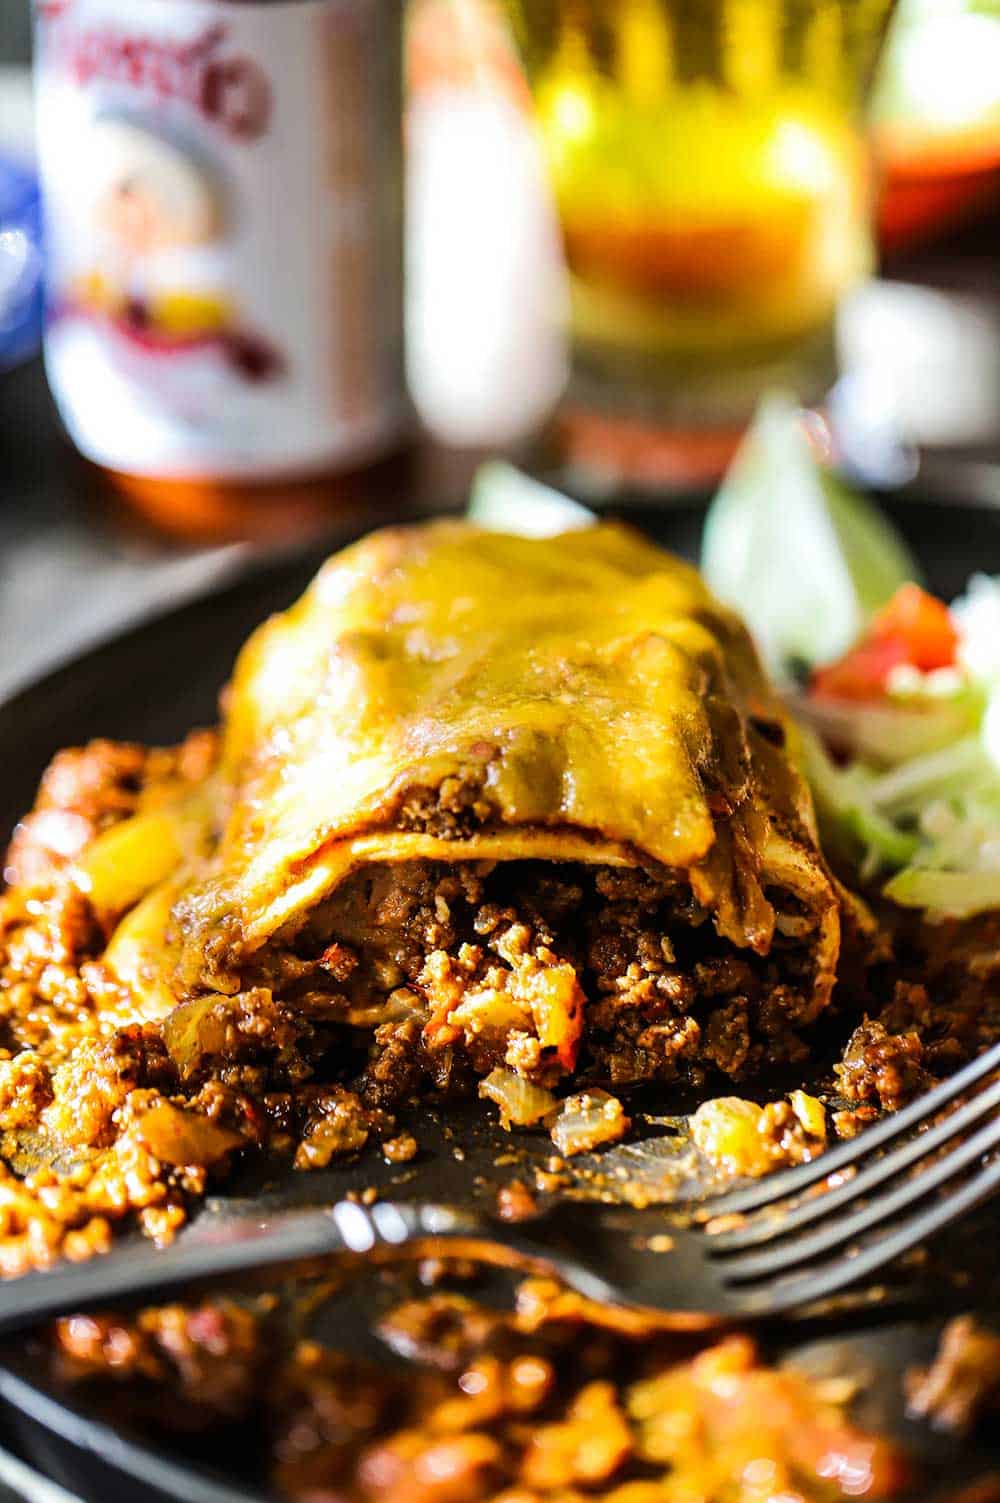 A smothered beef burrito that has been cut open with the meat and bean mixture spilling out.